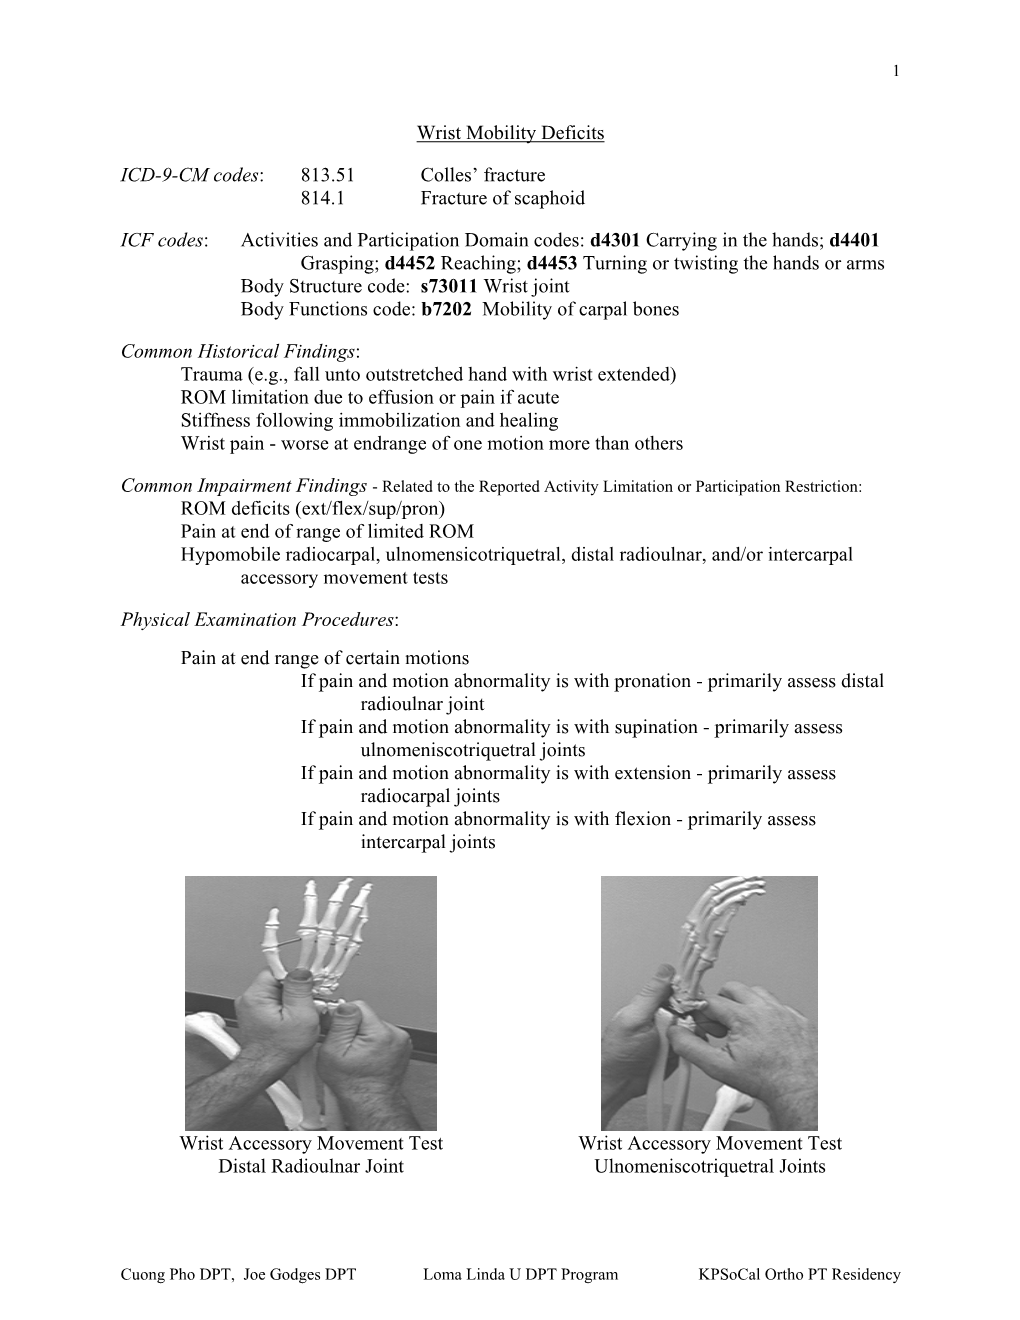 Wrist Mobility Deficits ICD-9-CM Codes: 813.51 Colles' Fracture 814.1